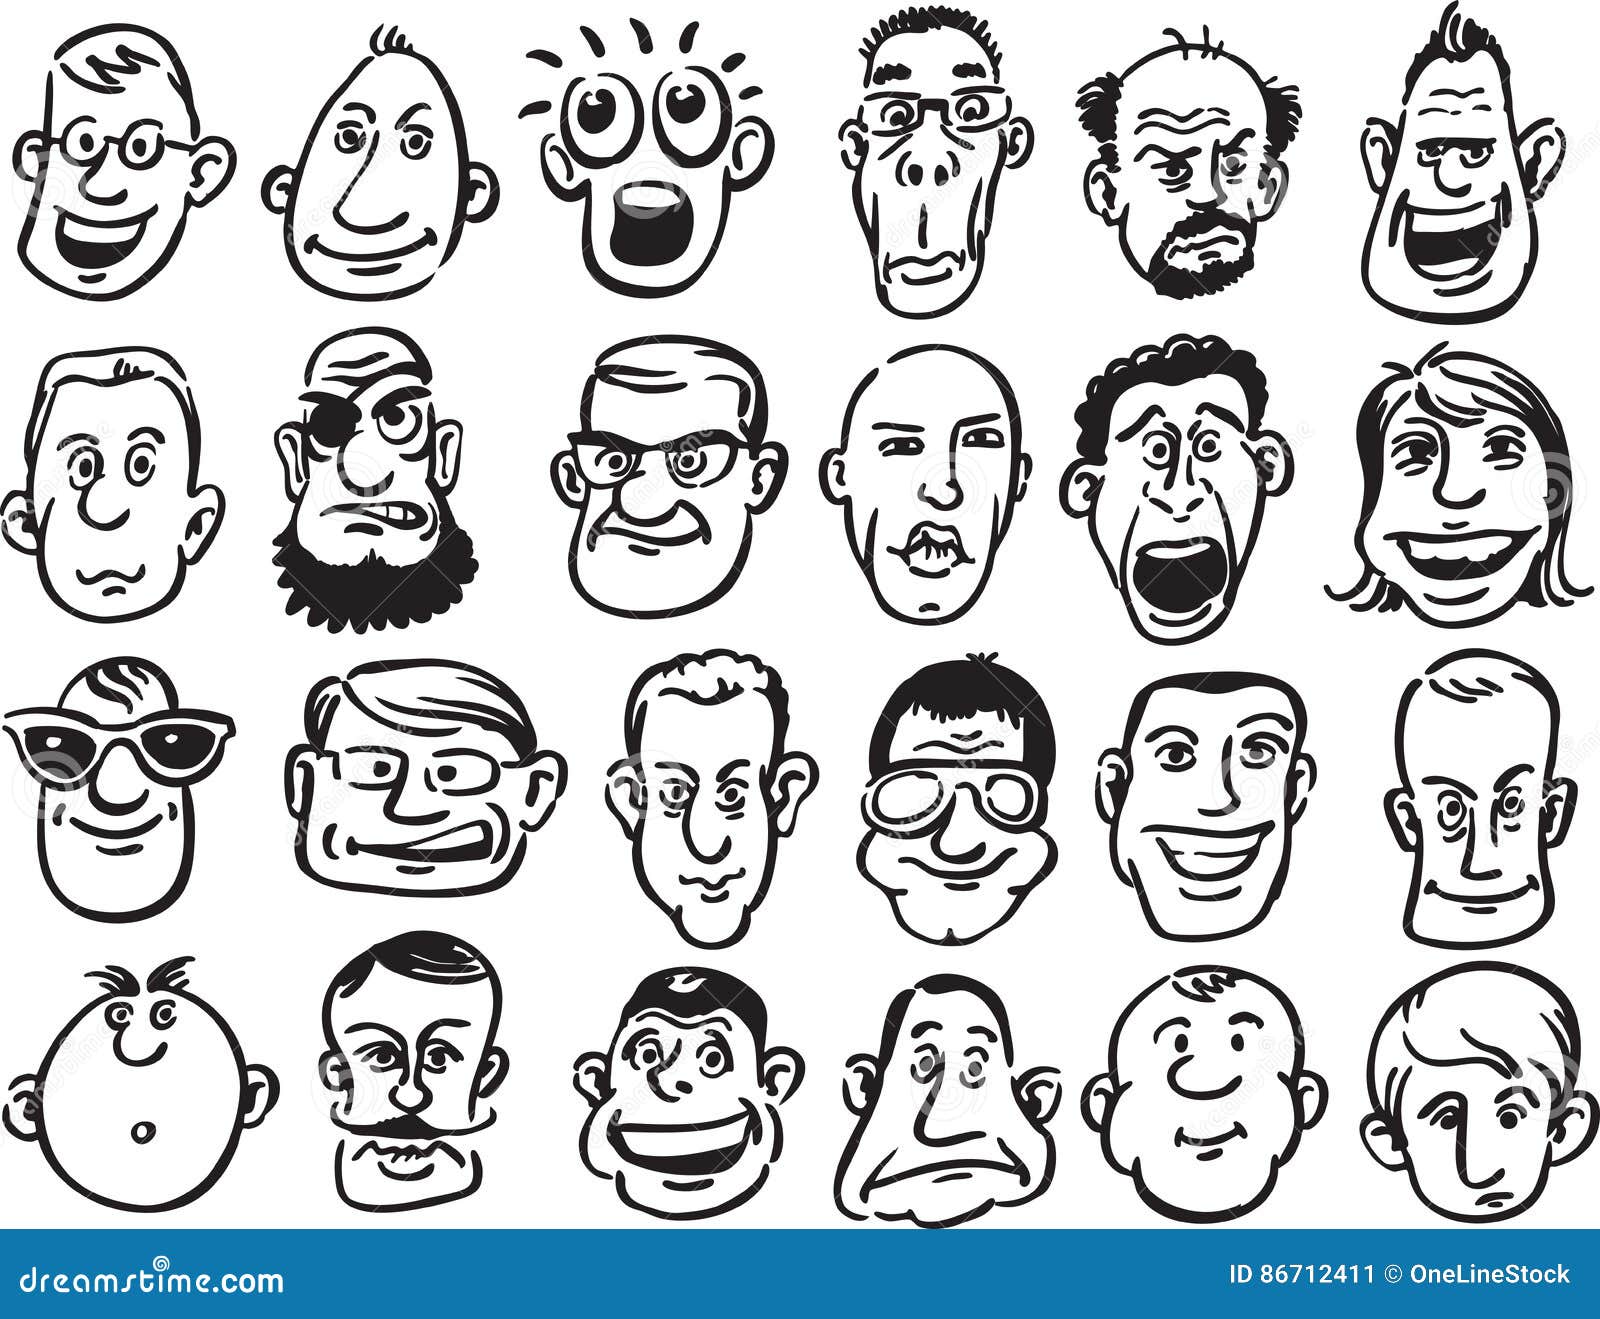 Set Of Caricature Faces Stock Vector Illustration Of Frustrated 86712411